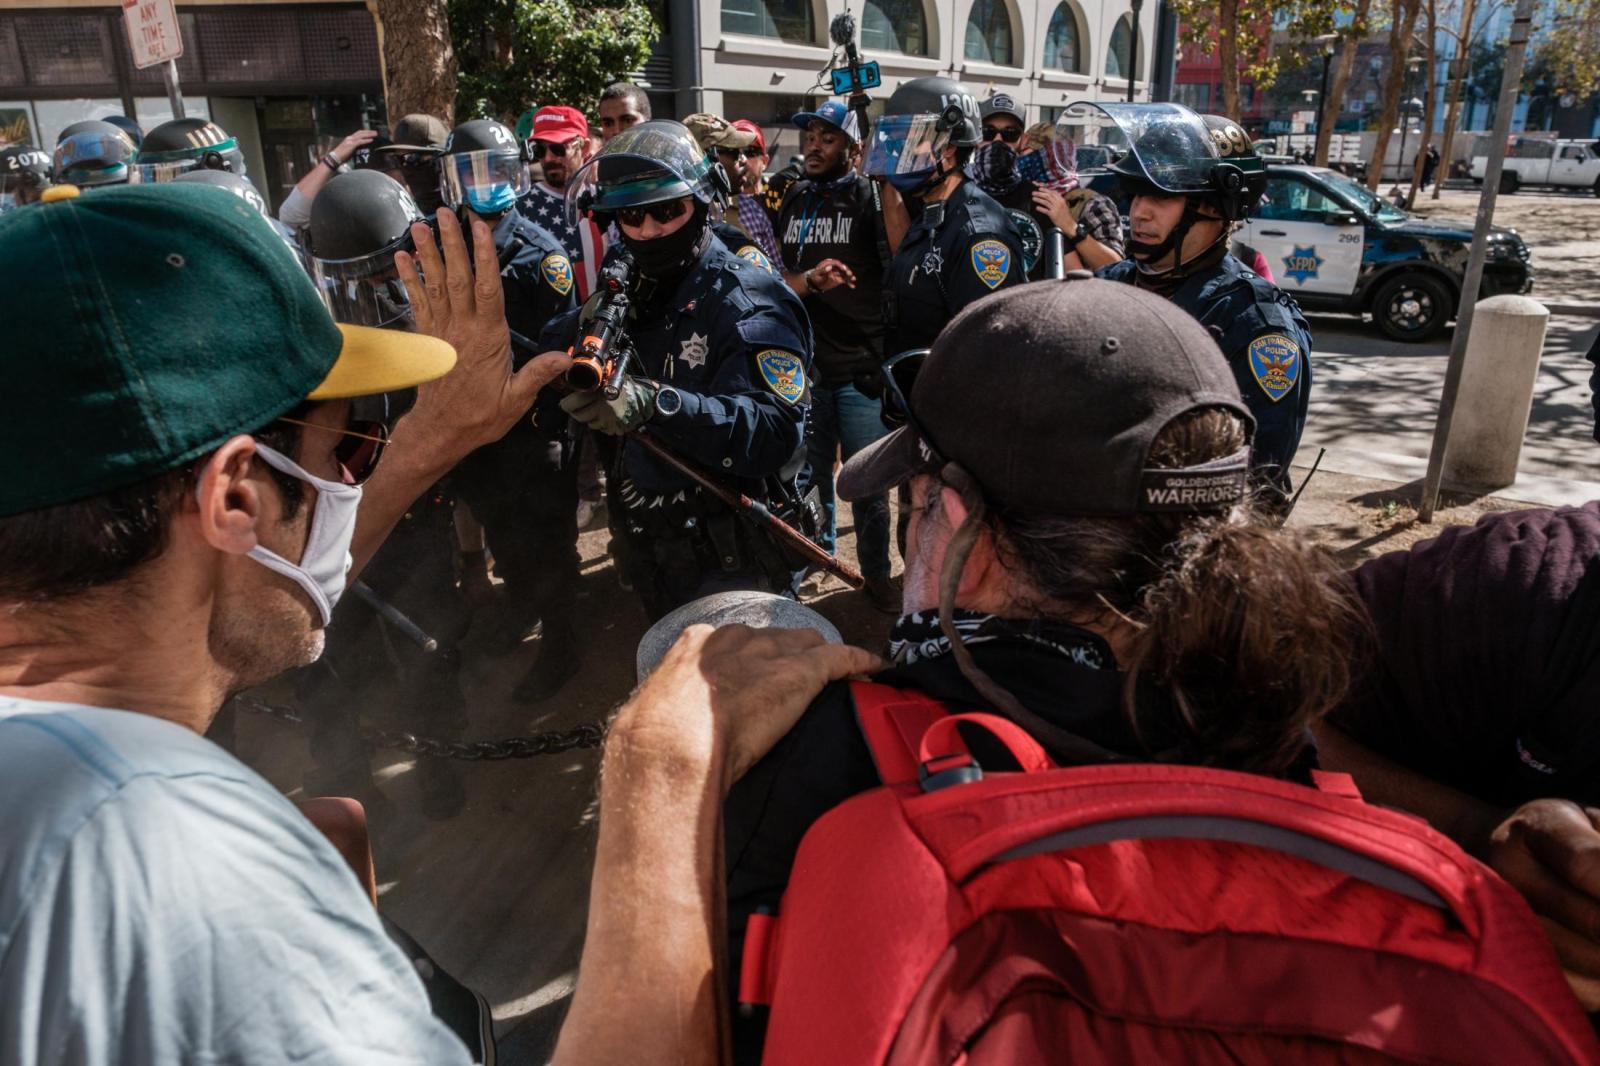 Image from NEWS FEATURES - Police point non lethal guns at counter protesters as...